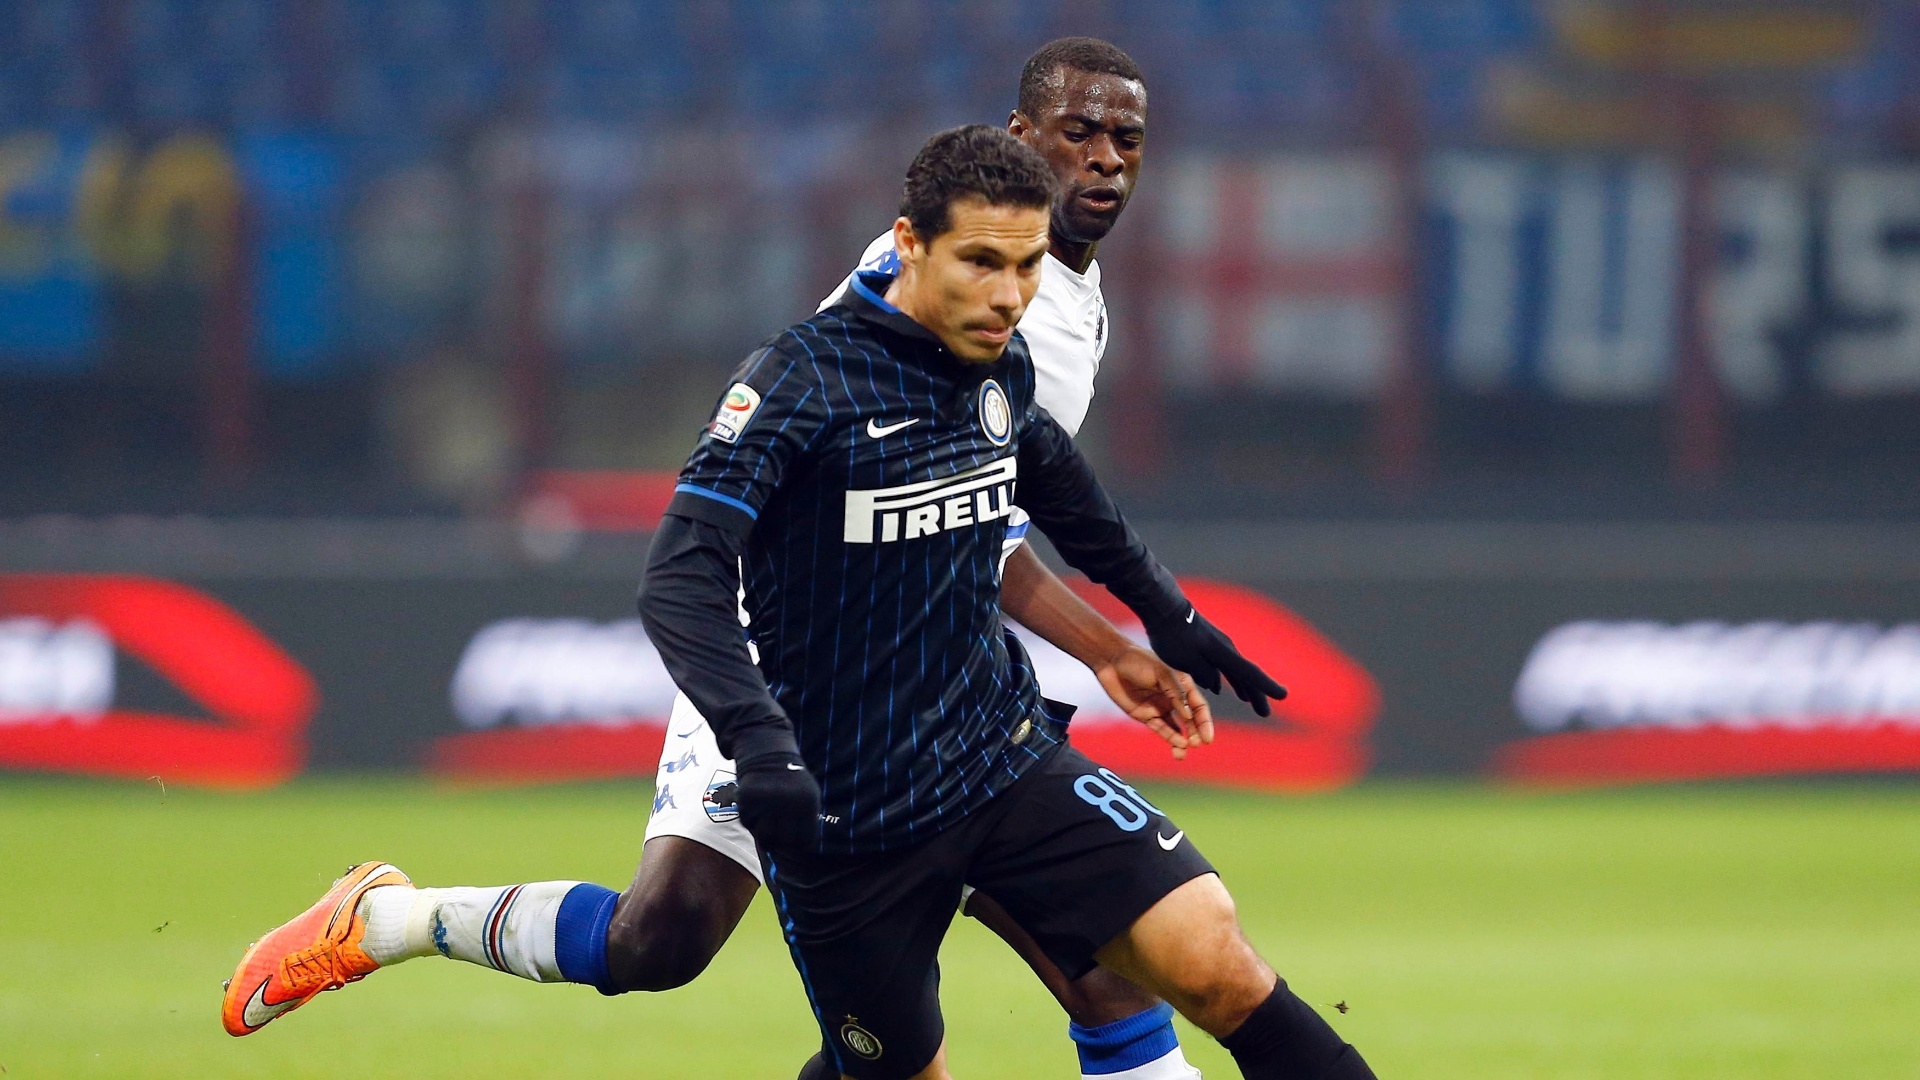 Hernanes icing his thigh after substitution